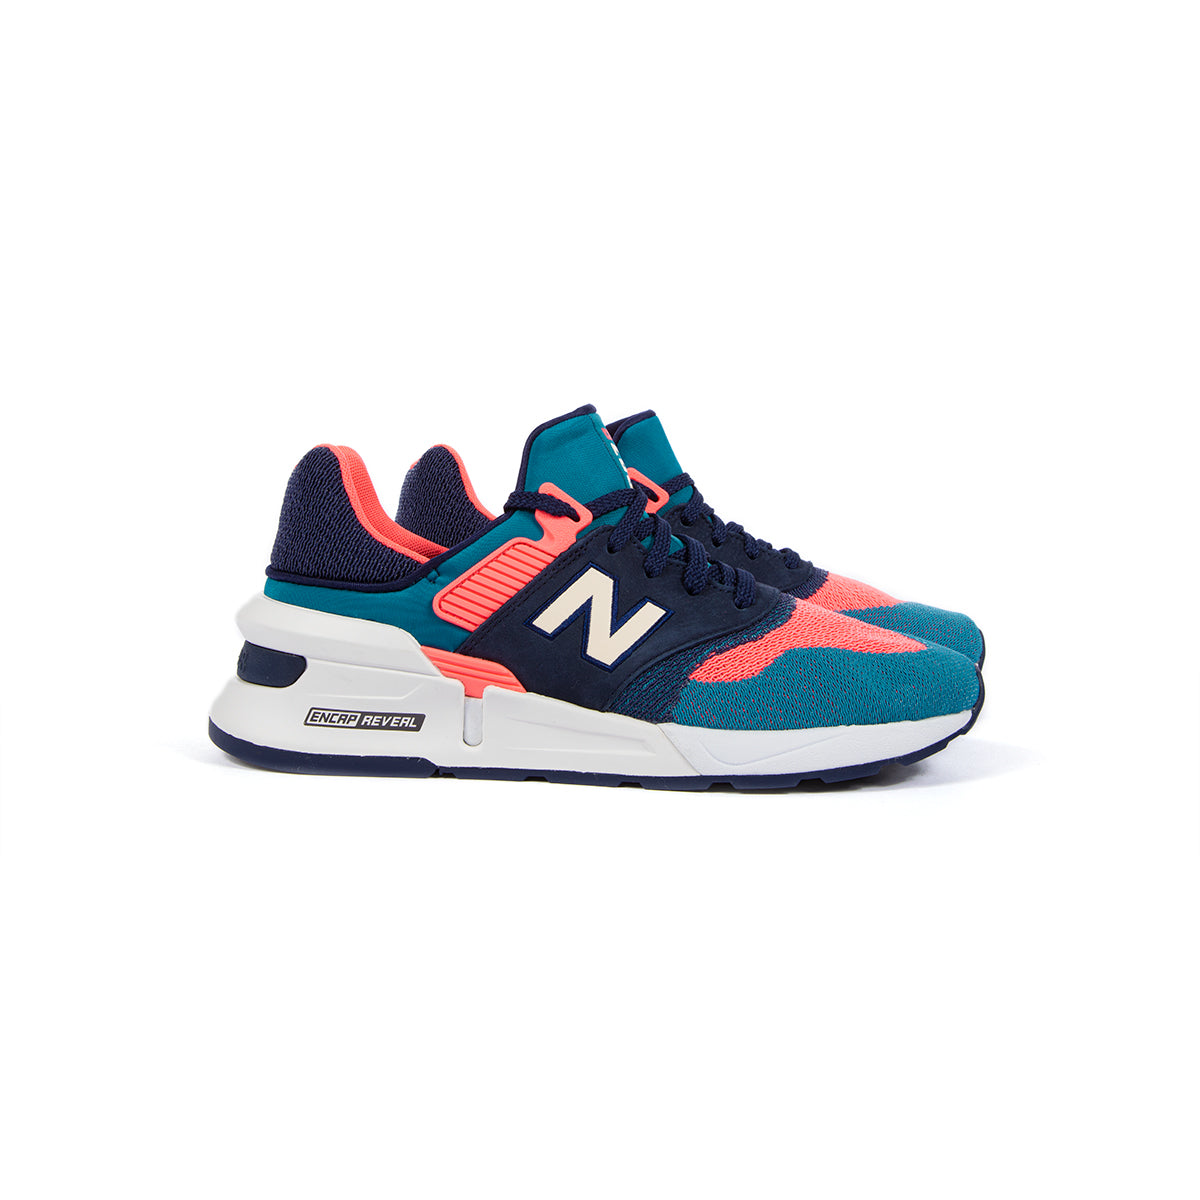 NEW BALANCE MS997 (BLUE/CORAL PINK 